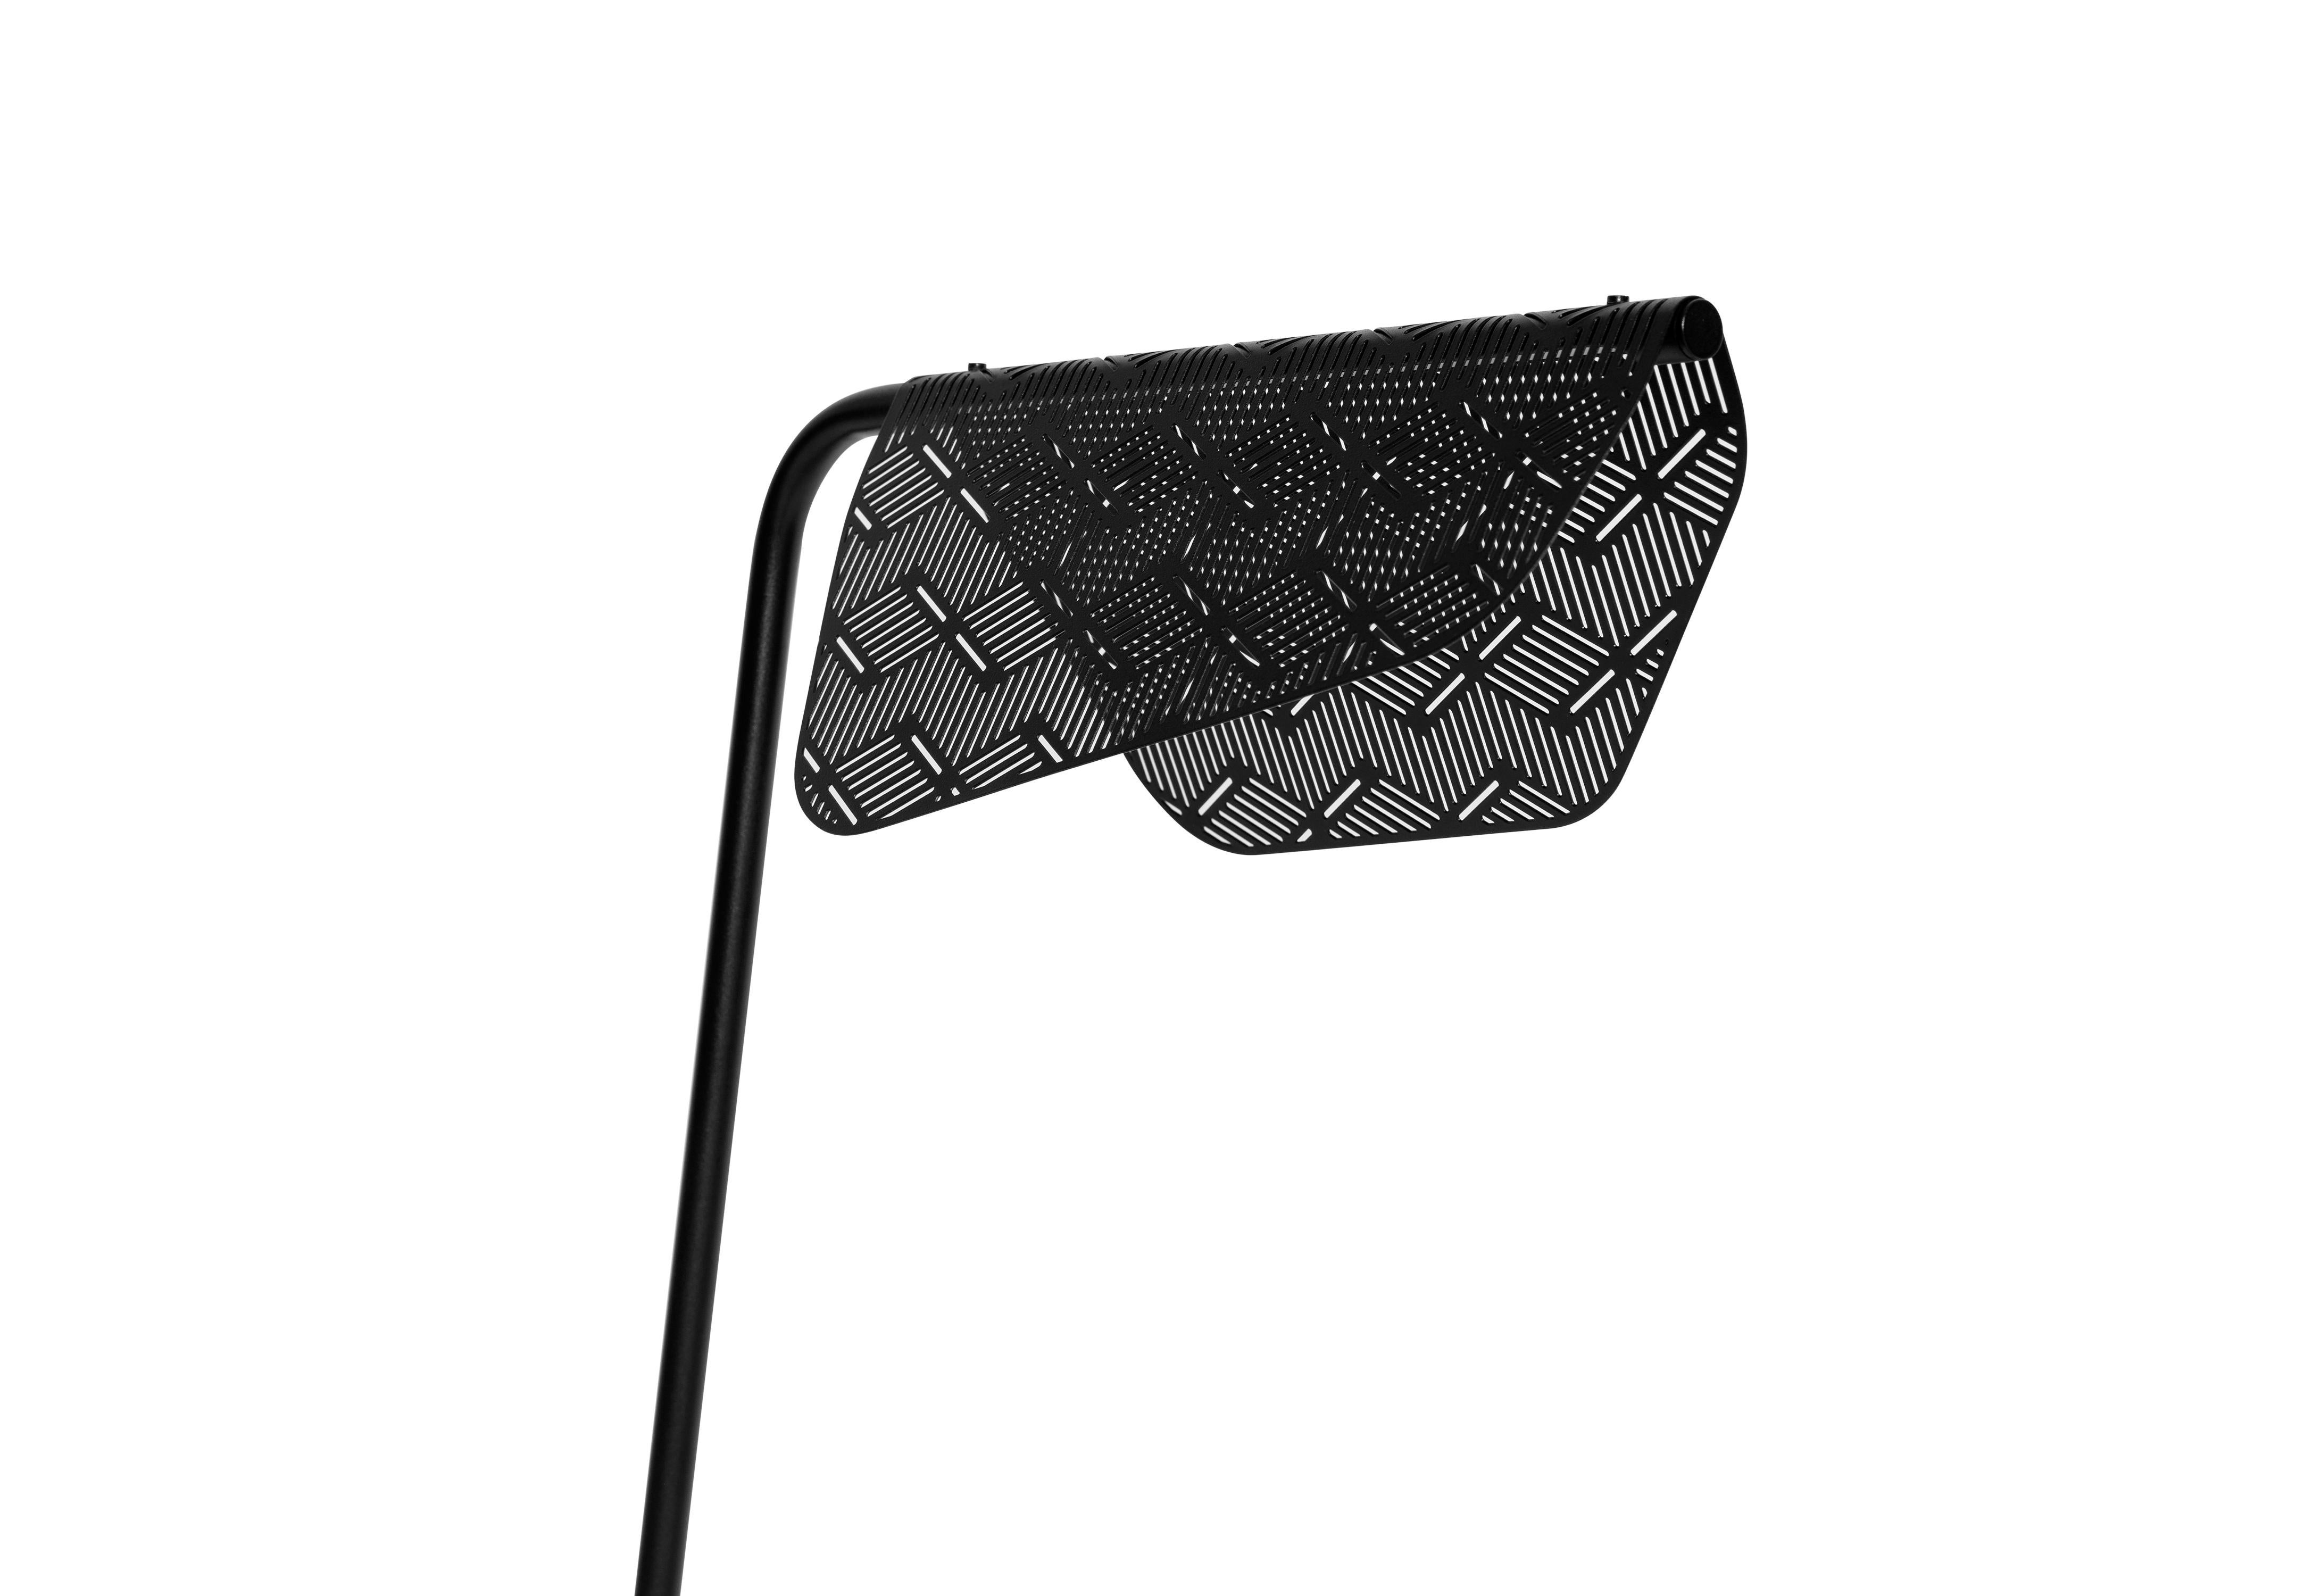 Petite Friture Mediterranea Floor Lamp in Black by Noé Duchaufour-Lawrance, 2016 In New Condition For Sale In Brooklyn, NY